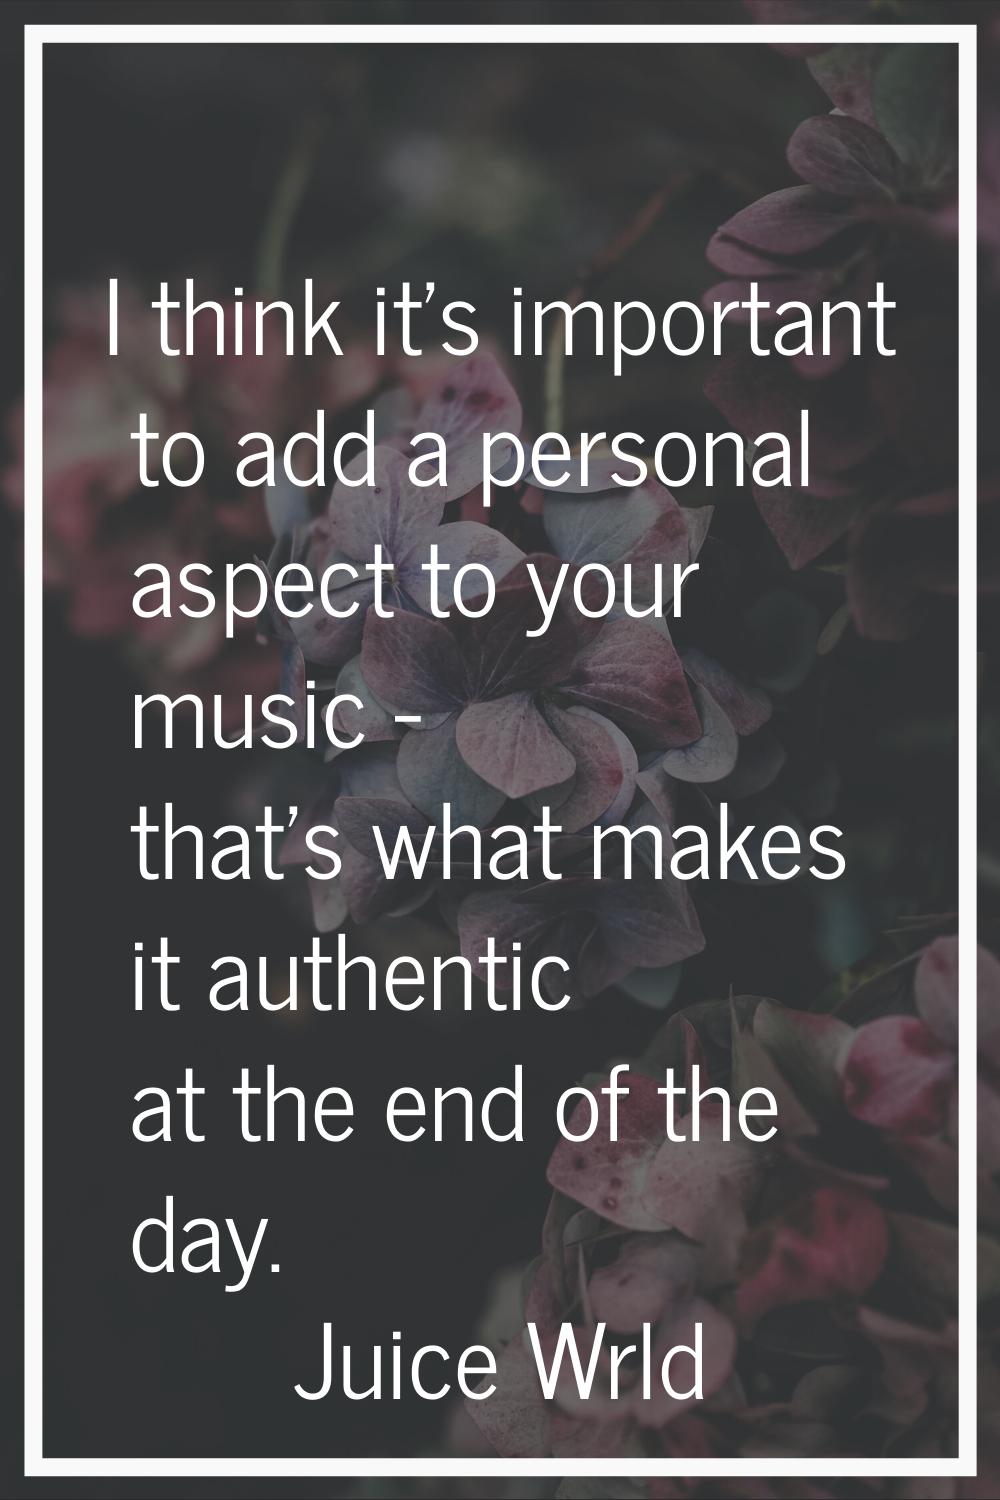 I think it's important to add a personal aspect to your music - that's what makes it authentic at t